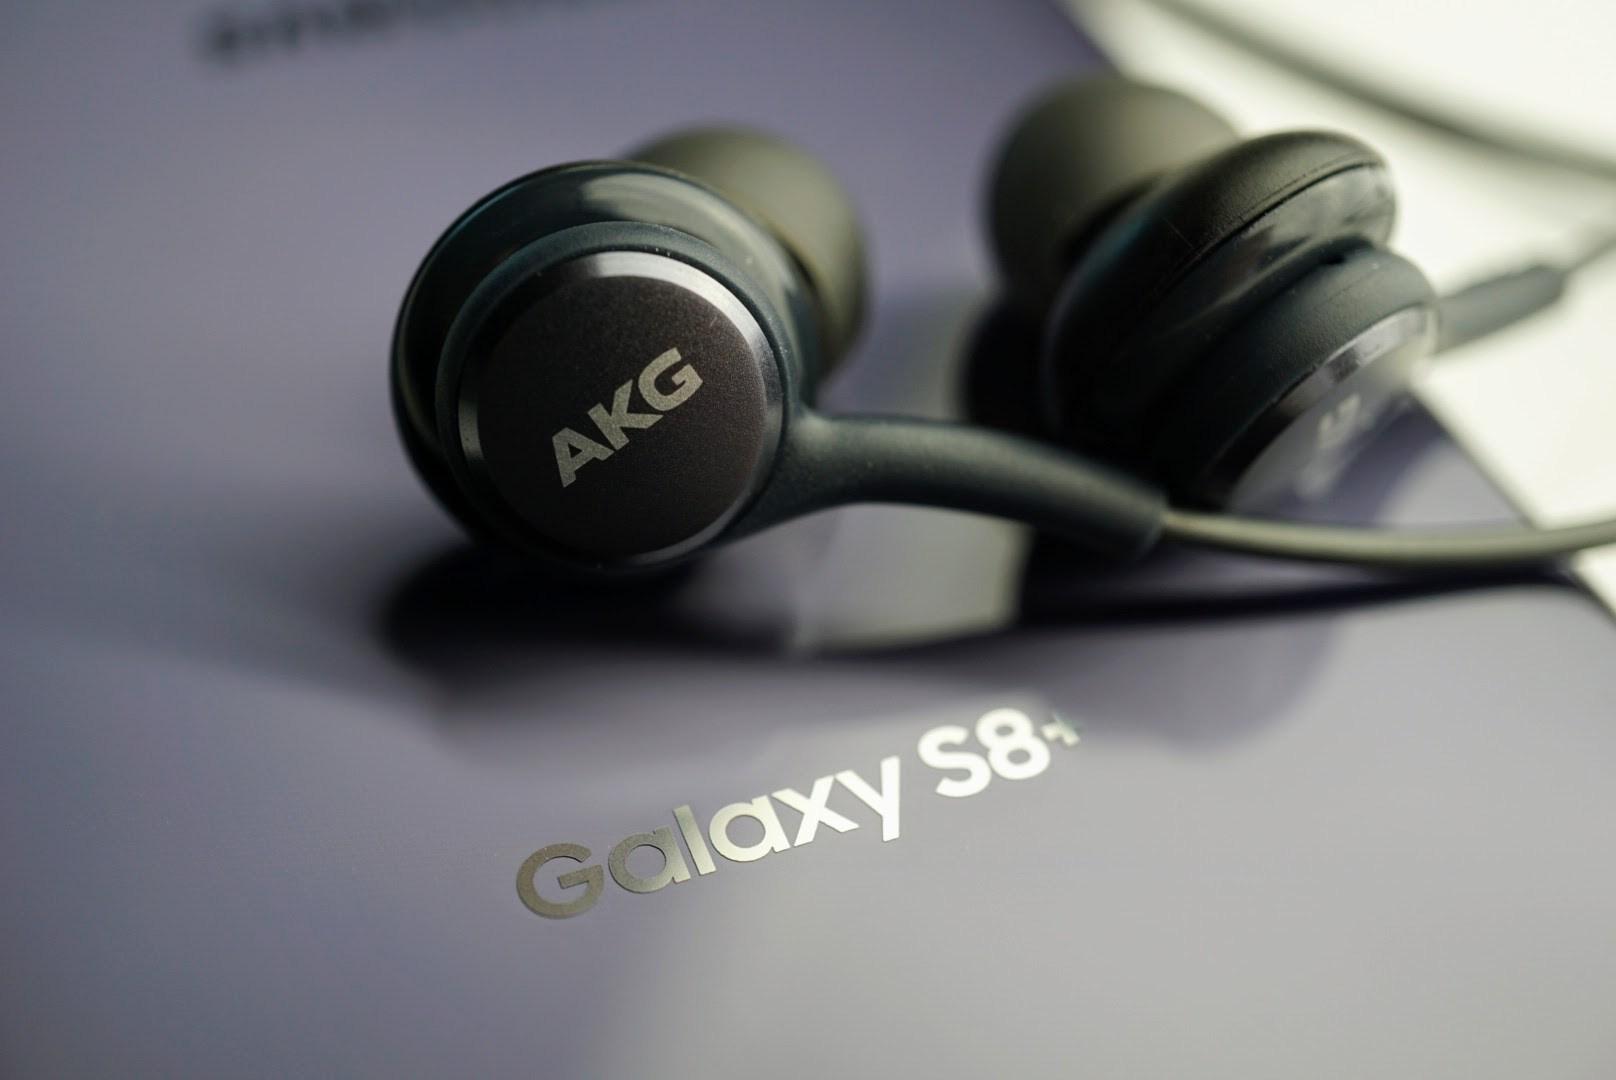 The free AKG earbuds included with the Samsung Galaxy S8 are really